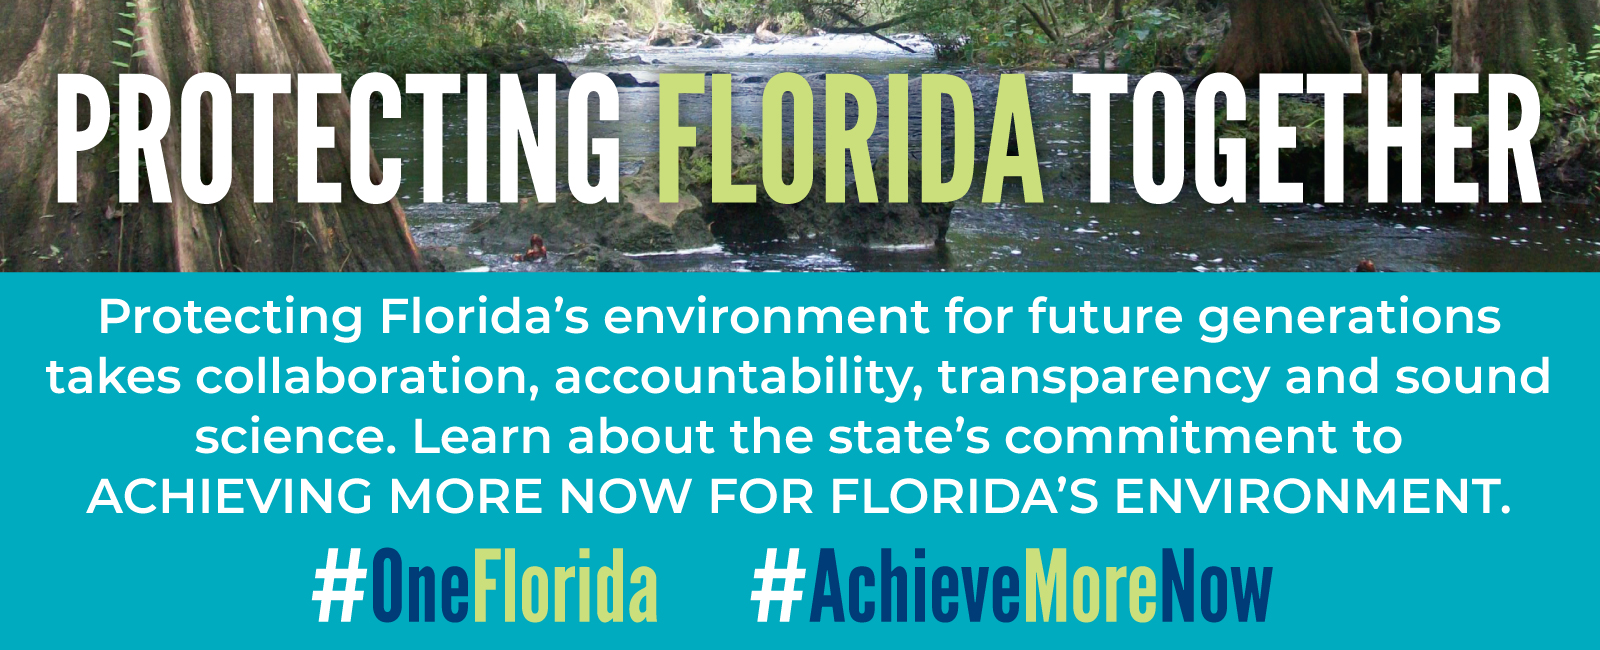 Protecting Florida’s environment for future generations  takes collaboration, accountability, transparency and sound science. Learn about the state’s commitment to  achieving more now for Florida’s environment. 